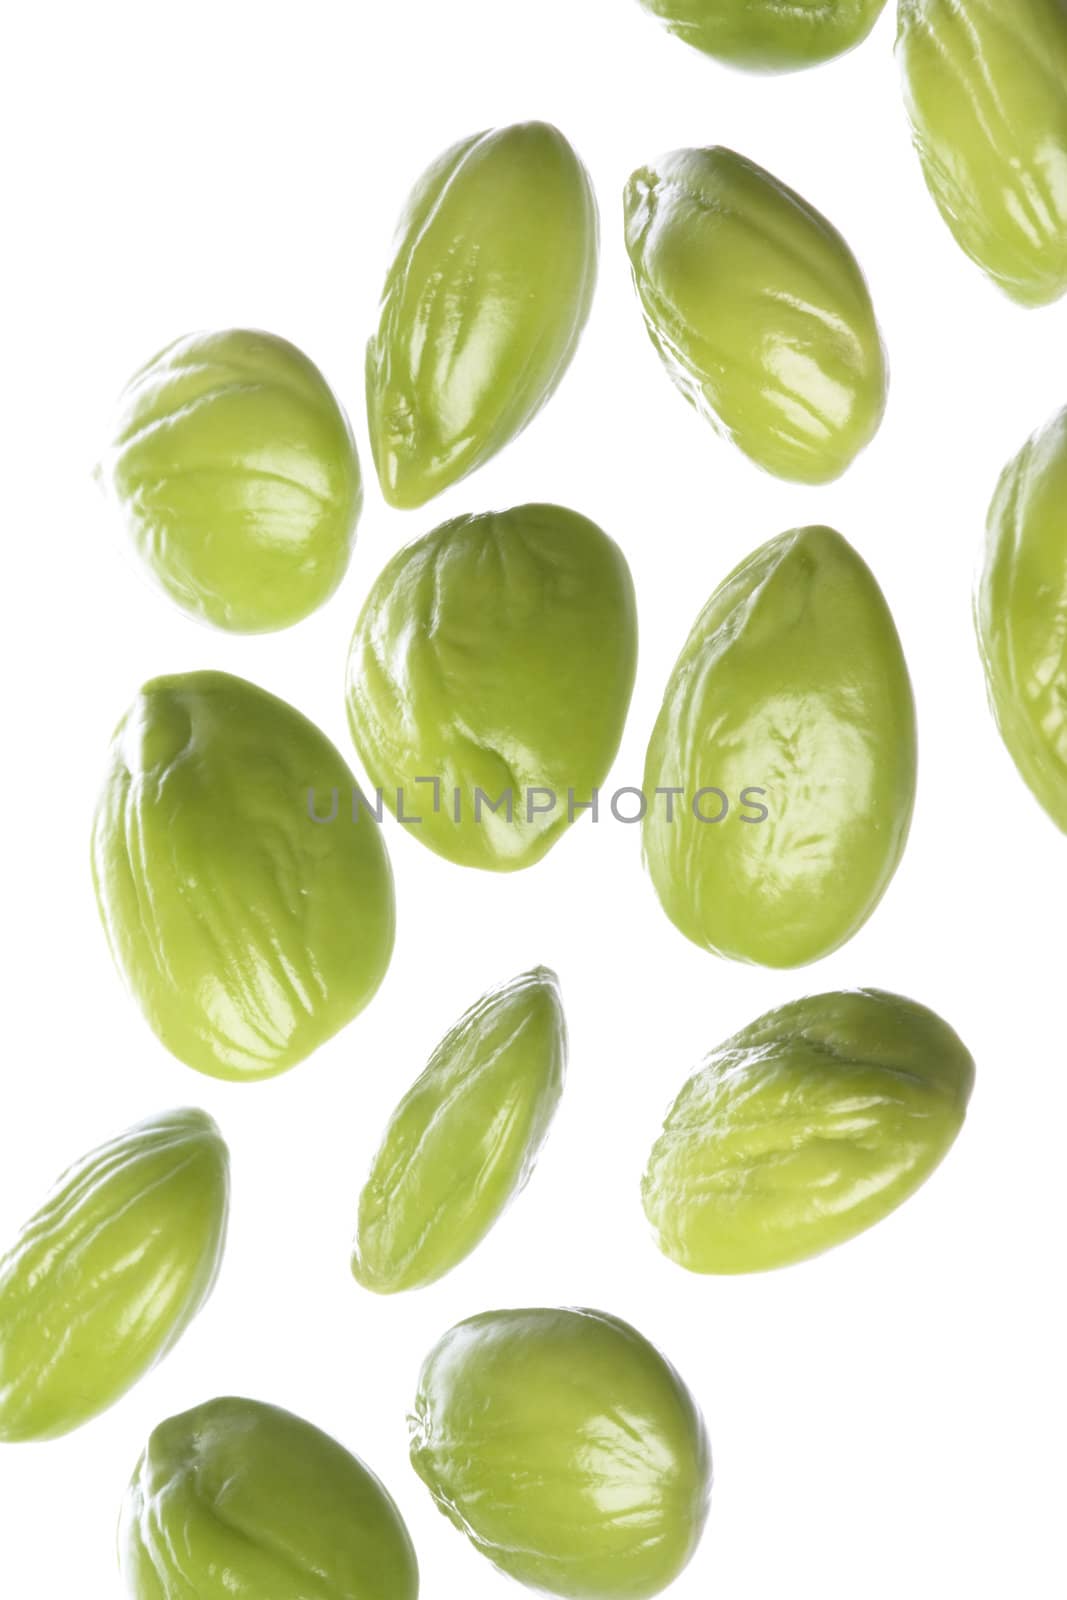 Isolated macro image of bitter beans or Petai as it is known in Malaysia.